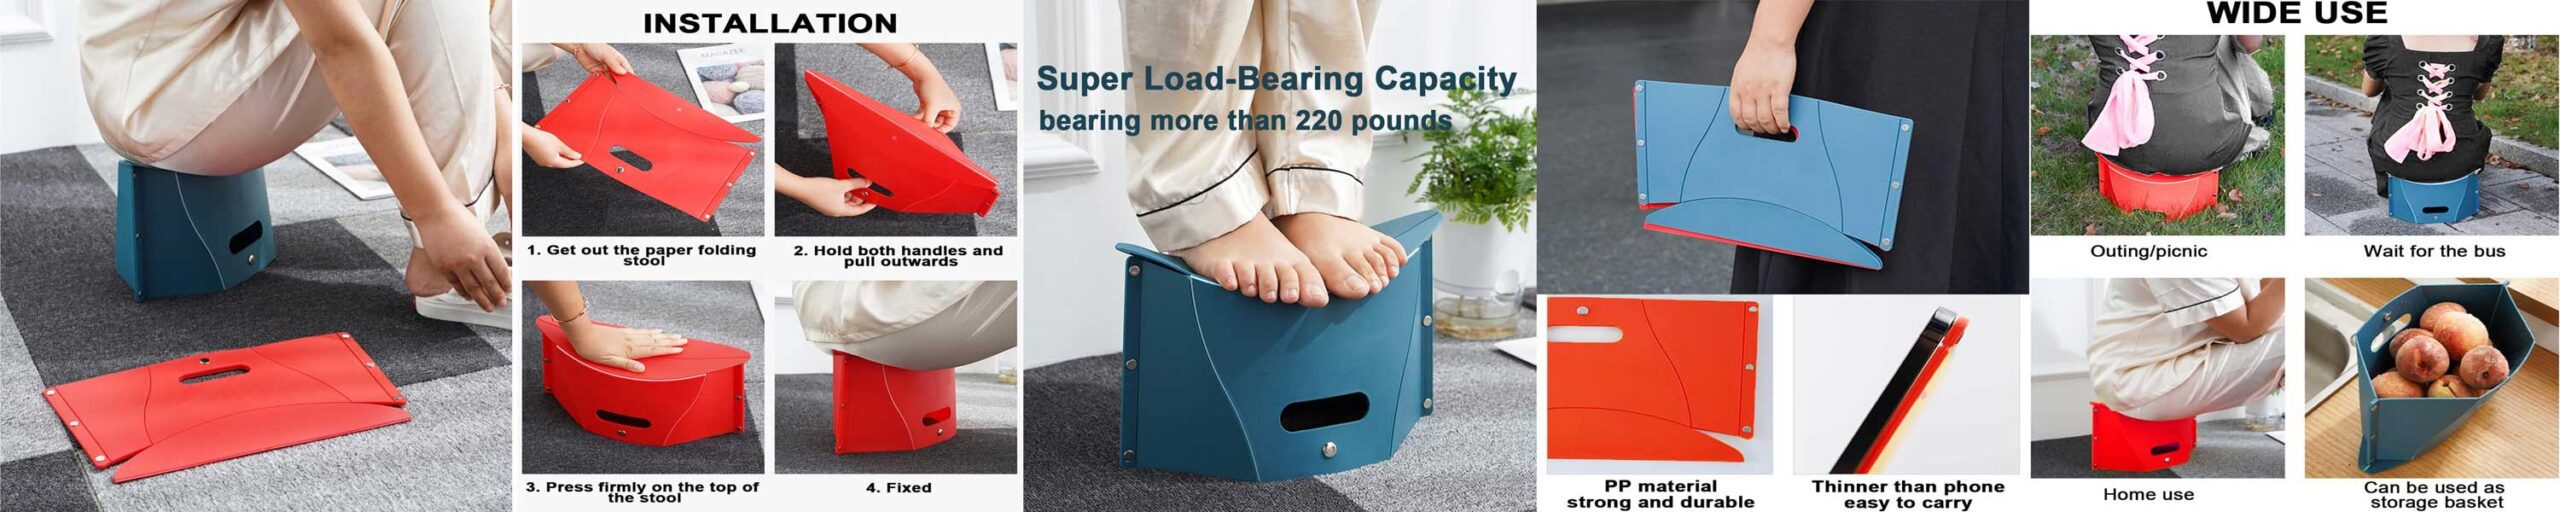 Small Size Portable Stool